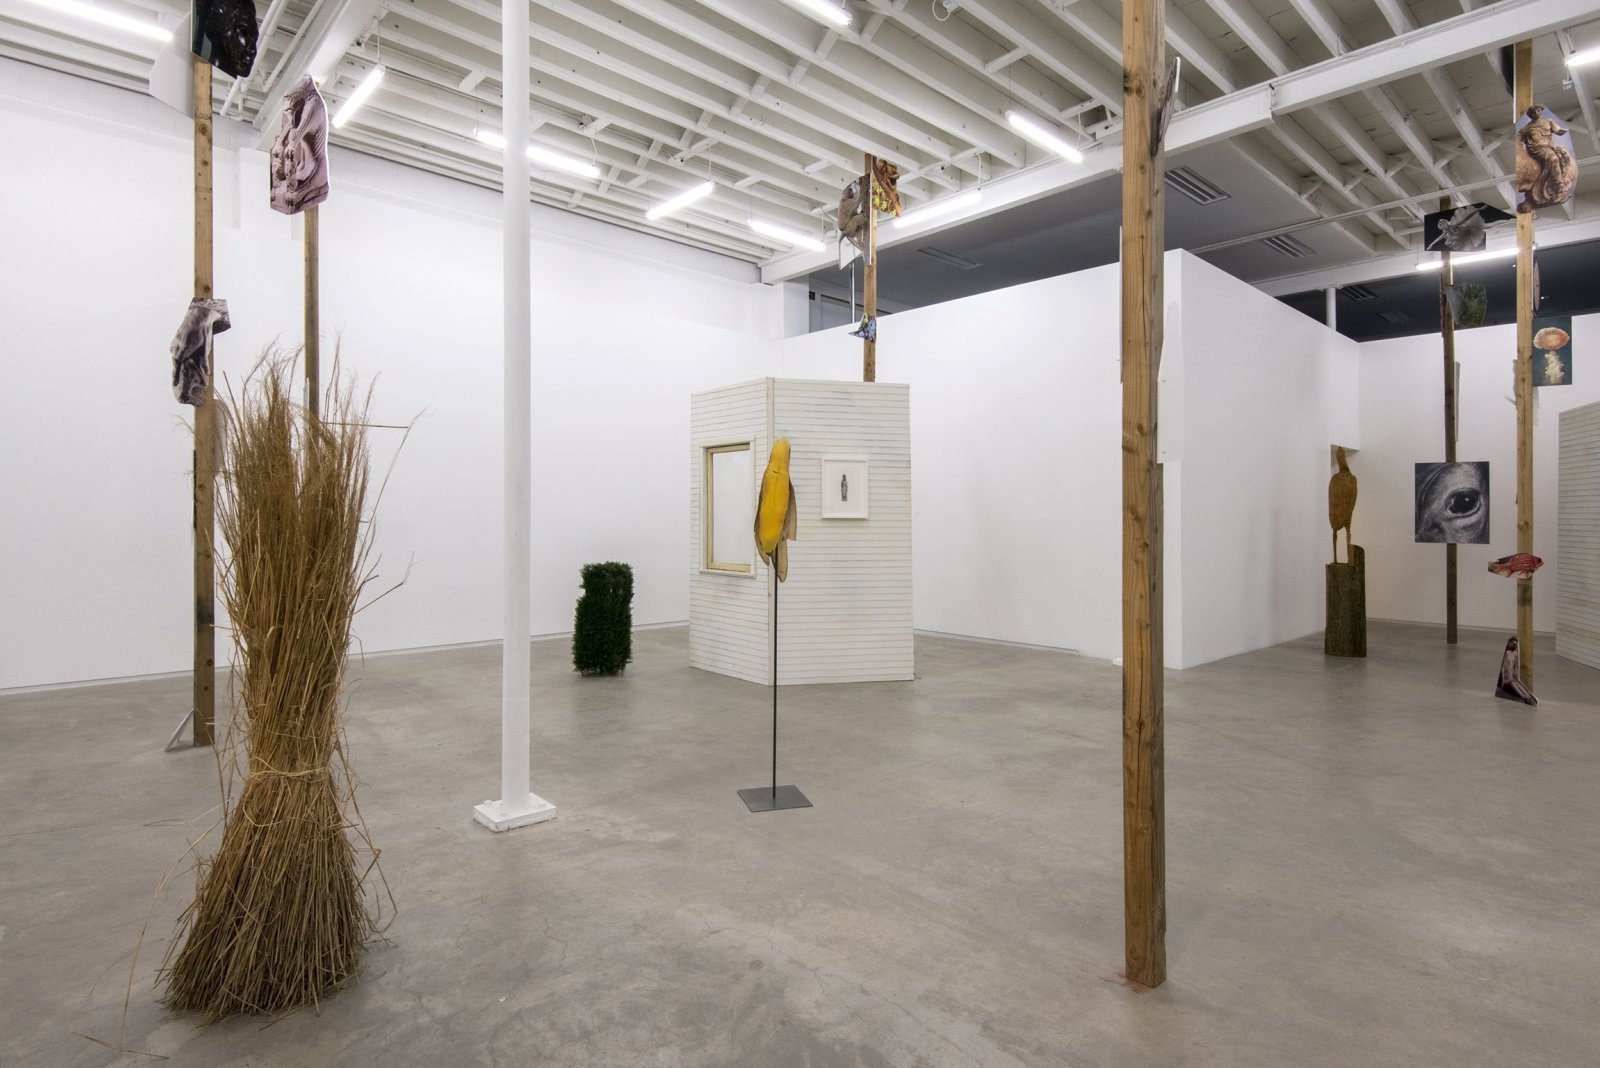 Geoffrey Farmer, installation view, The Grass and the Banana go for a walk, Catriona Jeffries, 2014​​ by Geoffrey Farmer